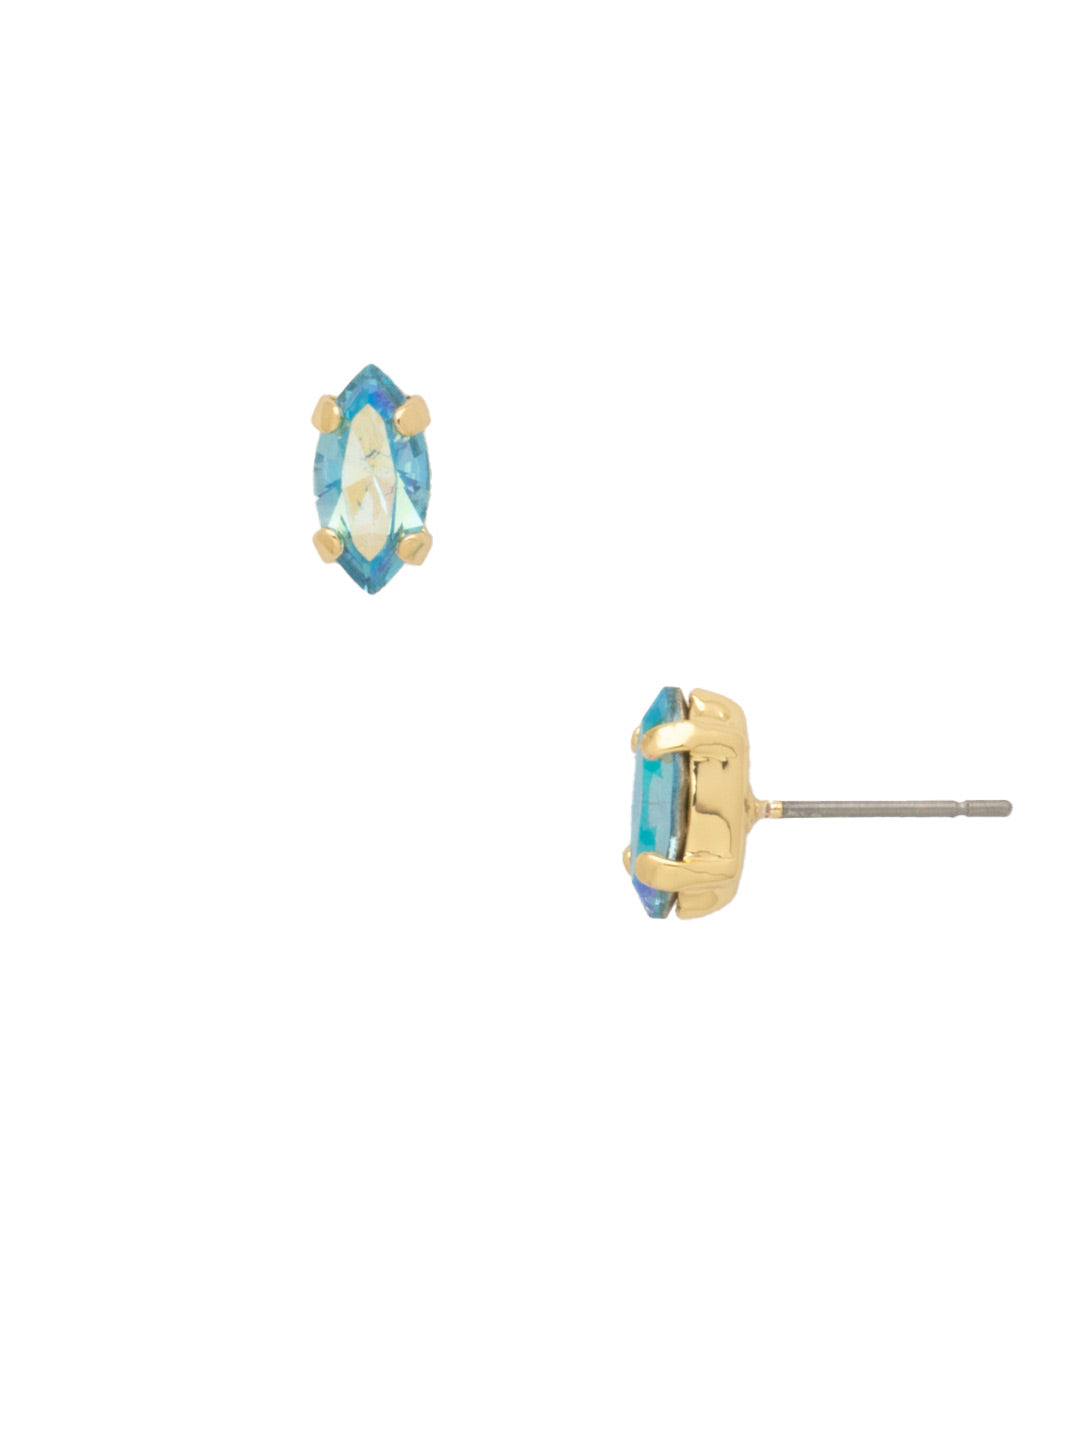 Clarissa Stud Earrings - EEP4BGPRT - <p>The Clarissa Stud Earring is for the lover of classics with a twist. Simple sparkling crystals get an oomph from the navette shape. From Sorrelli's Portofino collection in our Bright Gold-tone finish.</p>